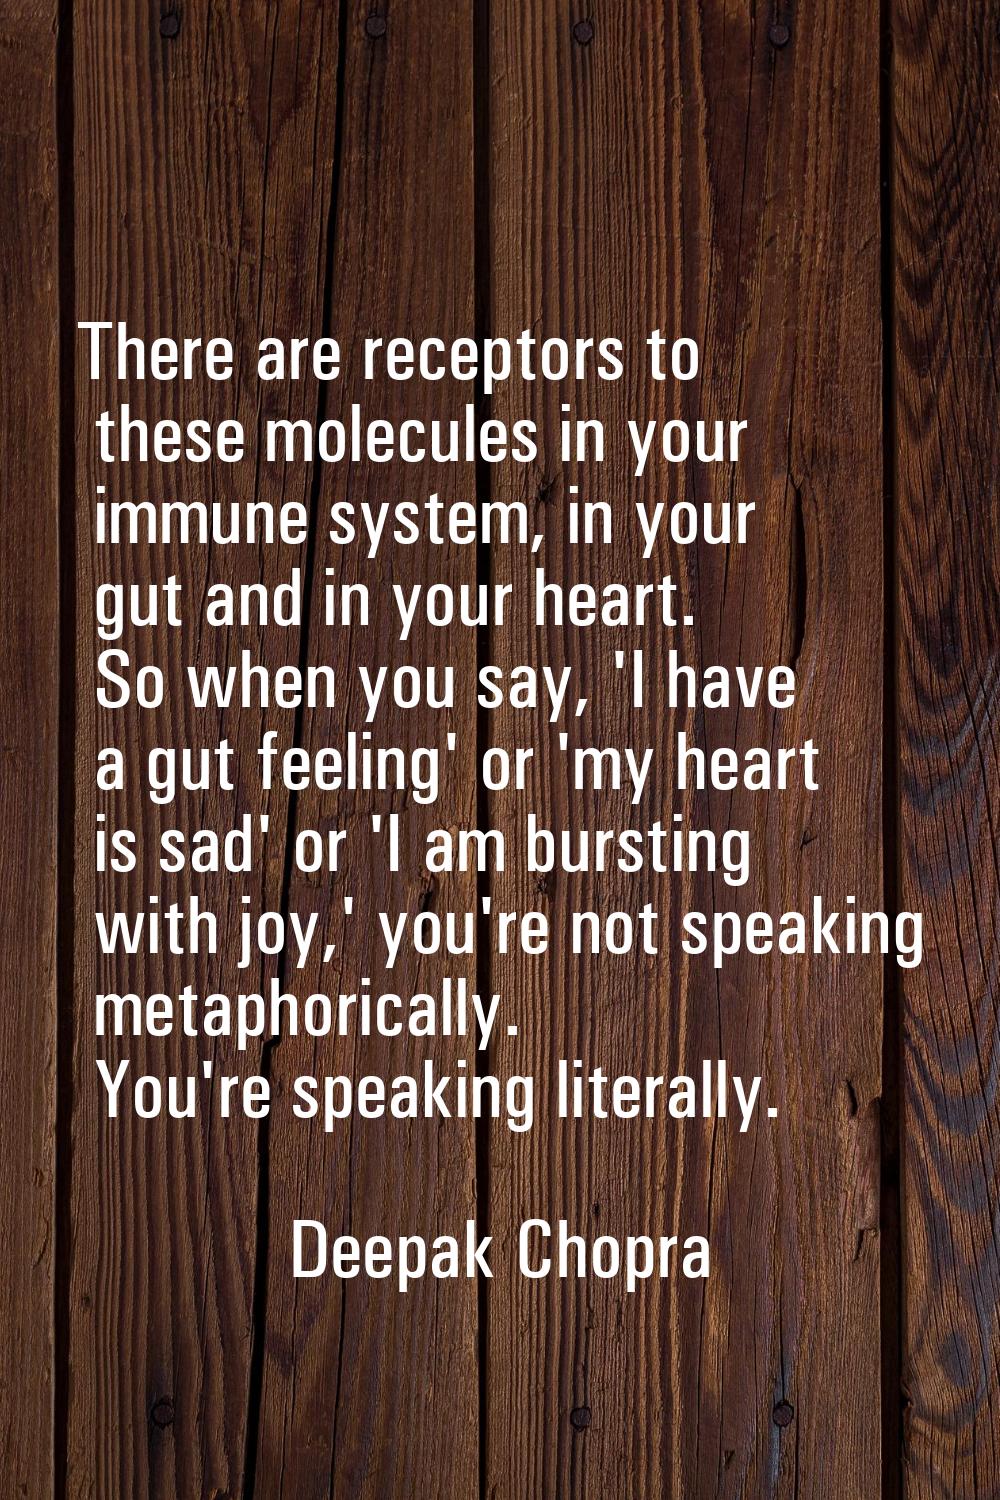 There are receptors to these molecules in your immune system, in your gut and in your heart. So whe